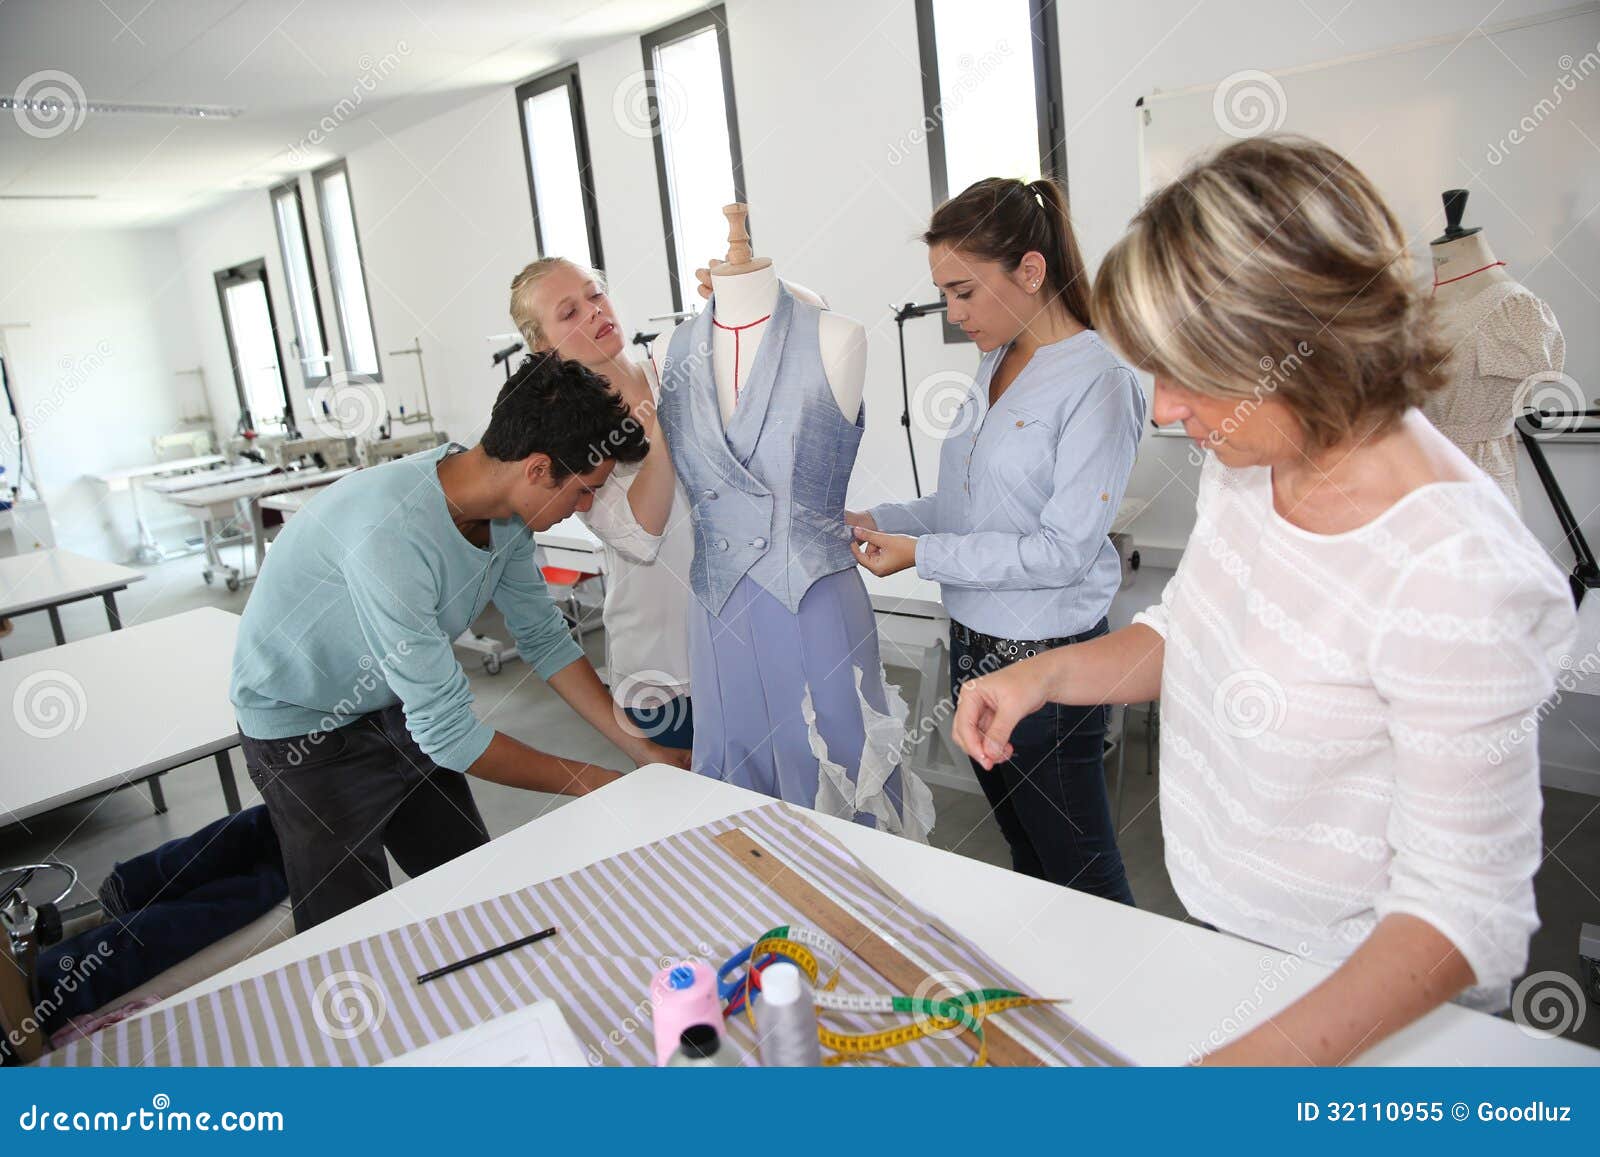 Students with Teacher in Dressmaking Class Stock Image - Image of ...